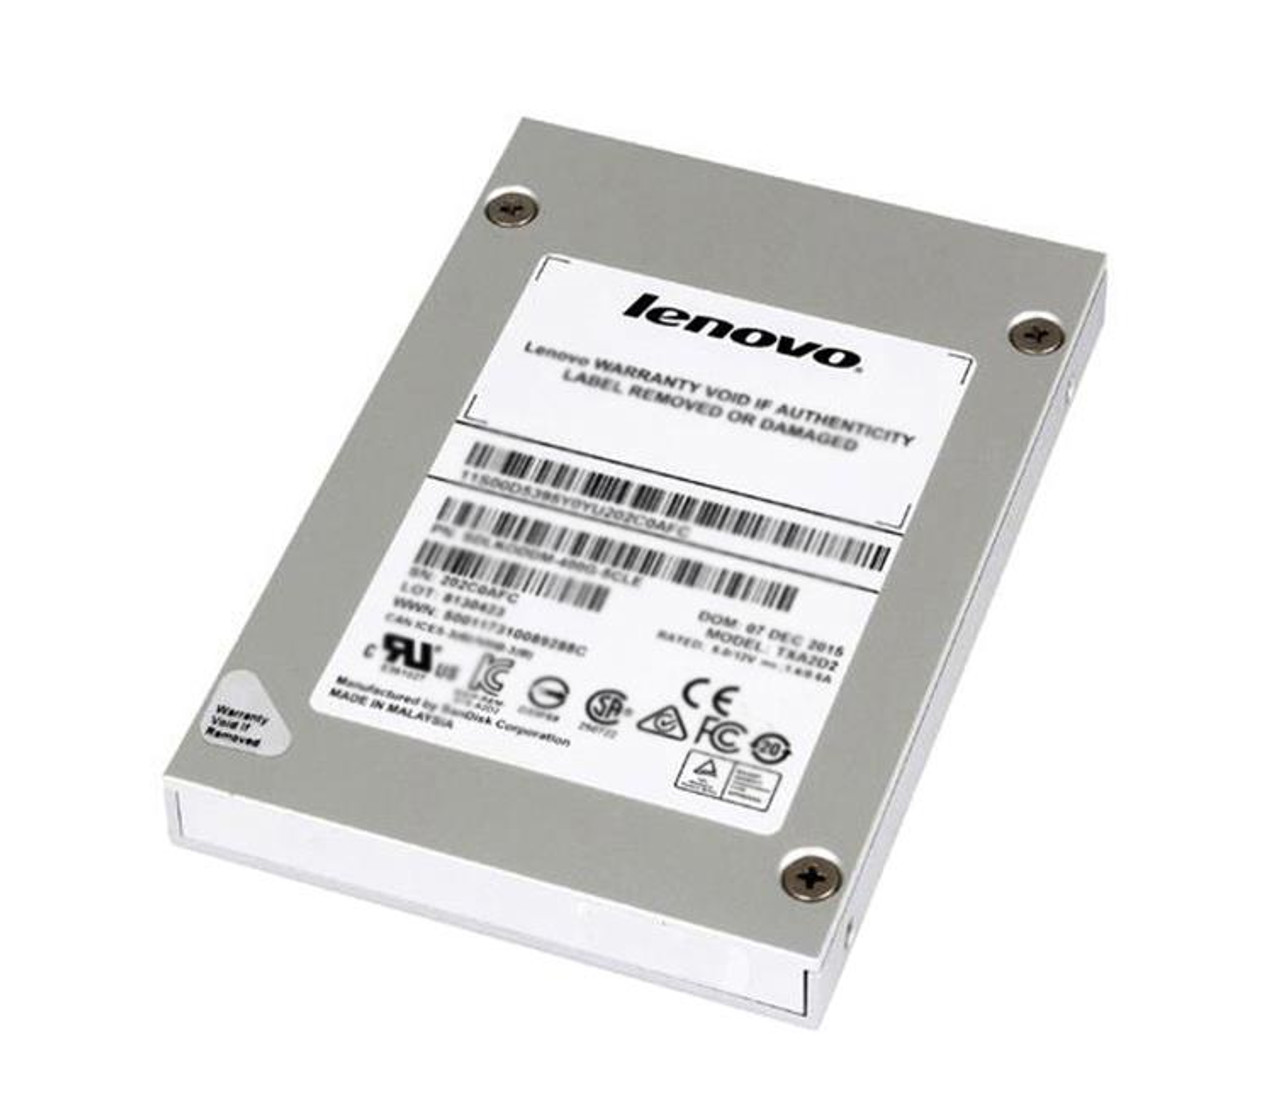 00XH247 Lenovo 480GB SATA 6Gbps Hot Swap 2.5-inch Internal Solid State Drive (SSD) for ThinkServer TS460